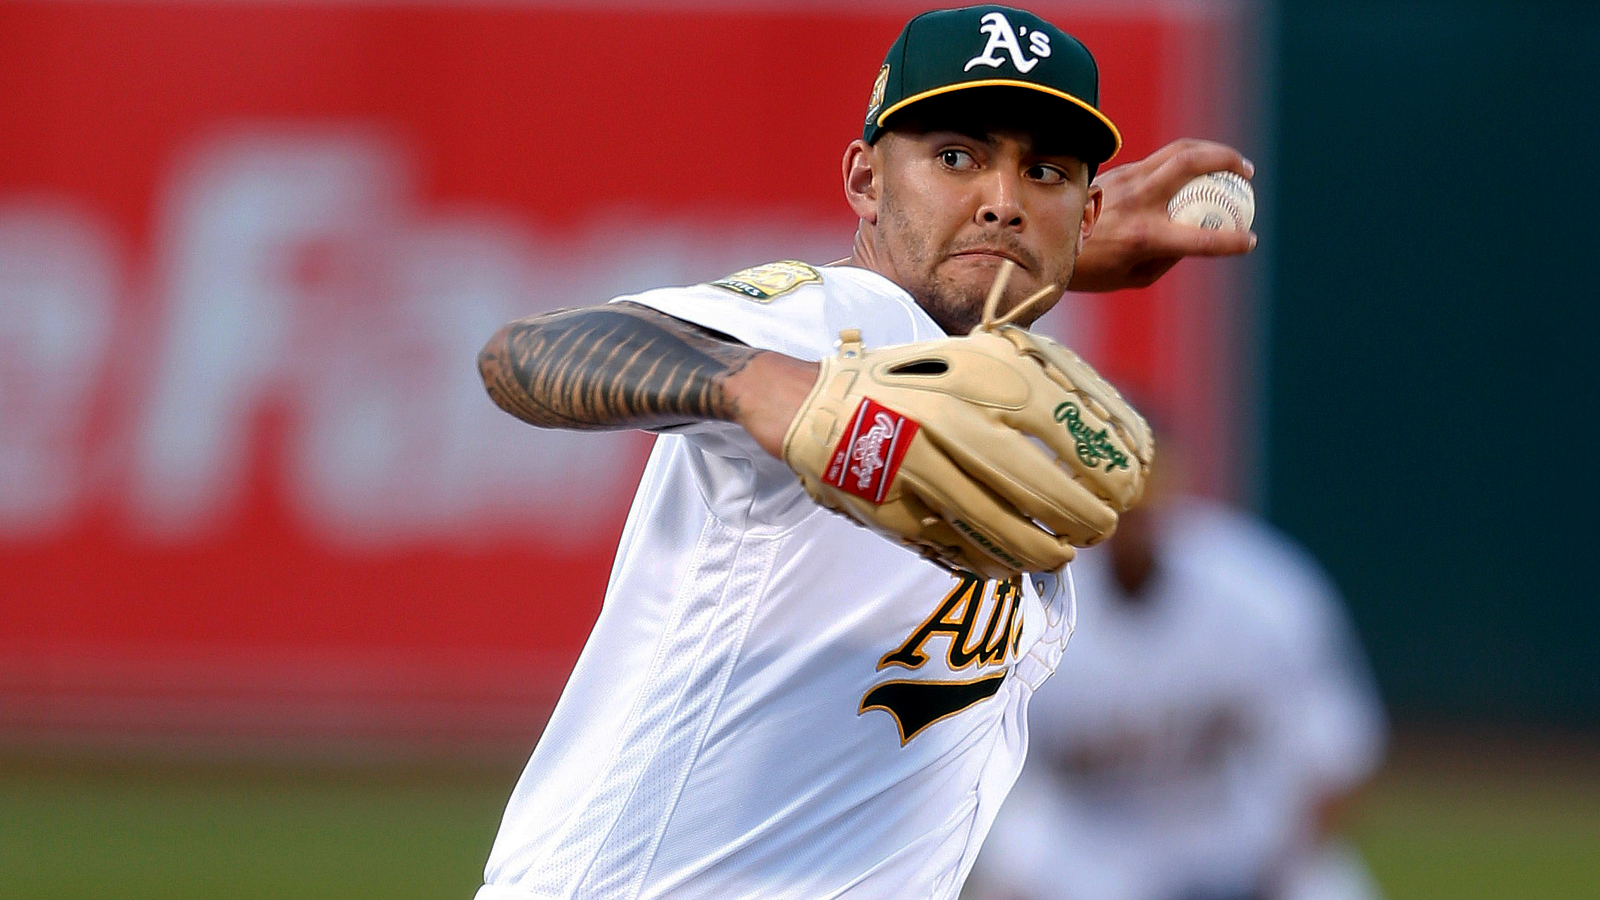 Twitter Reacts To Sean Manaea's No Hitter Against Red Sox